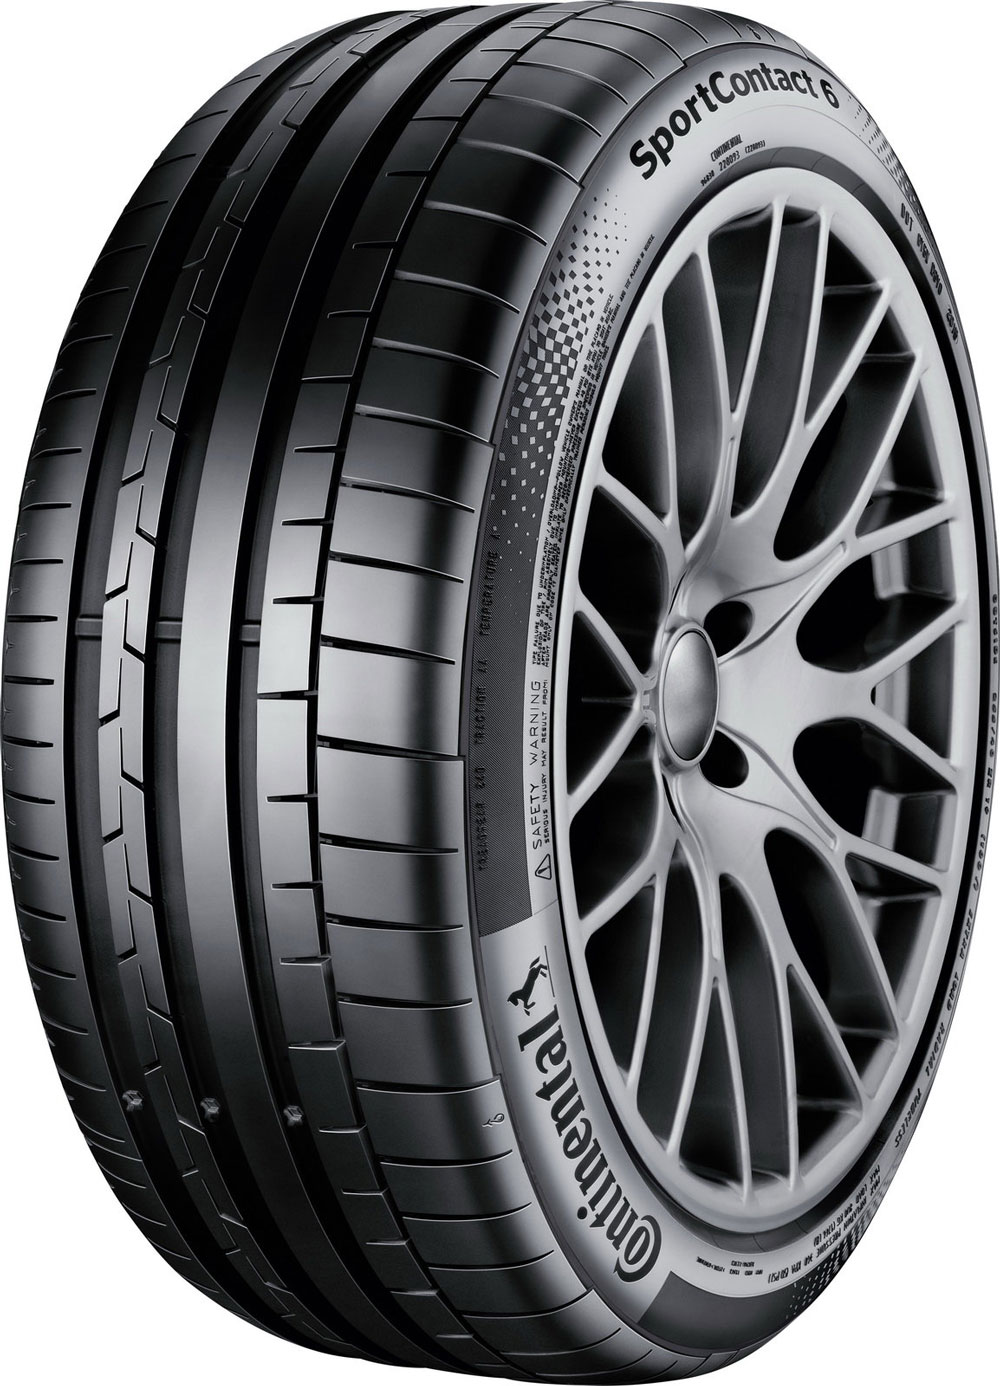 Гуми за кола CONTINENTAL SPORT CONTACT 6 XL 255/30 R19 91Y